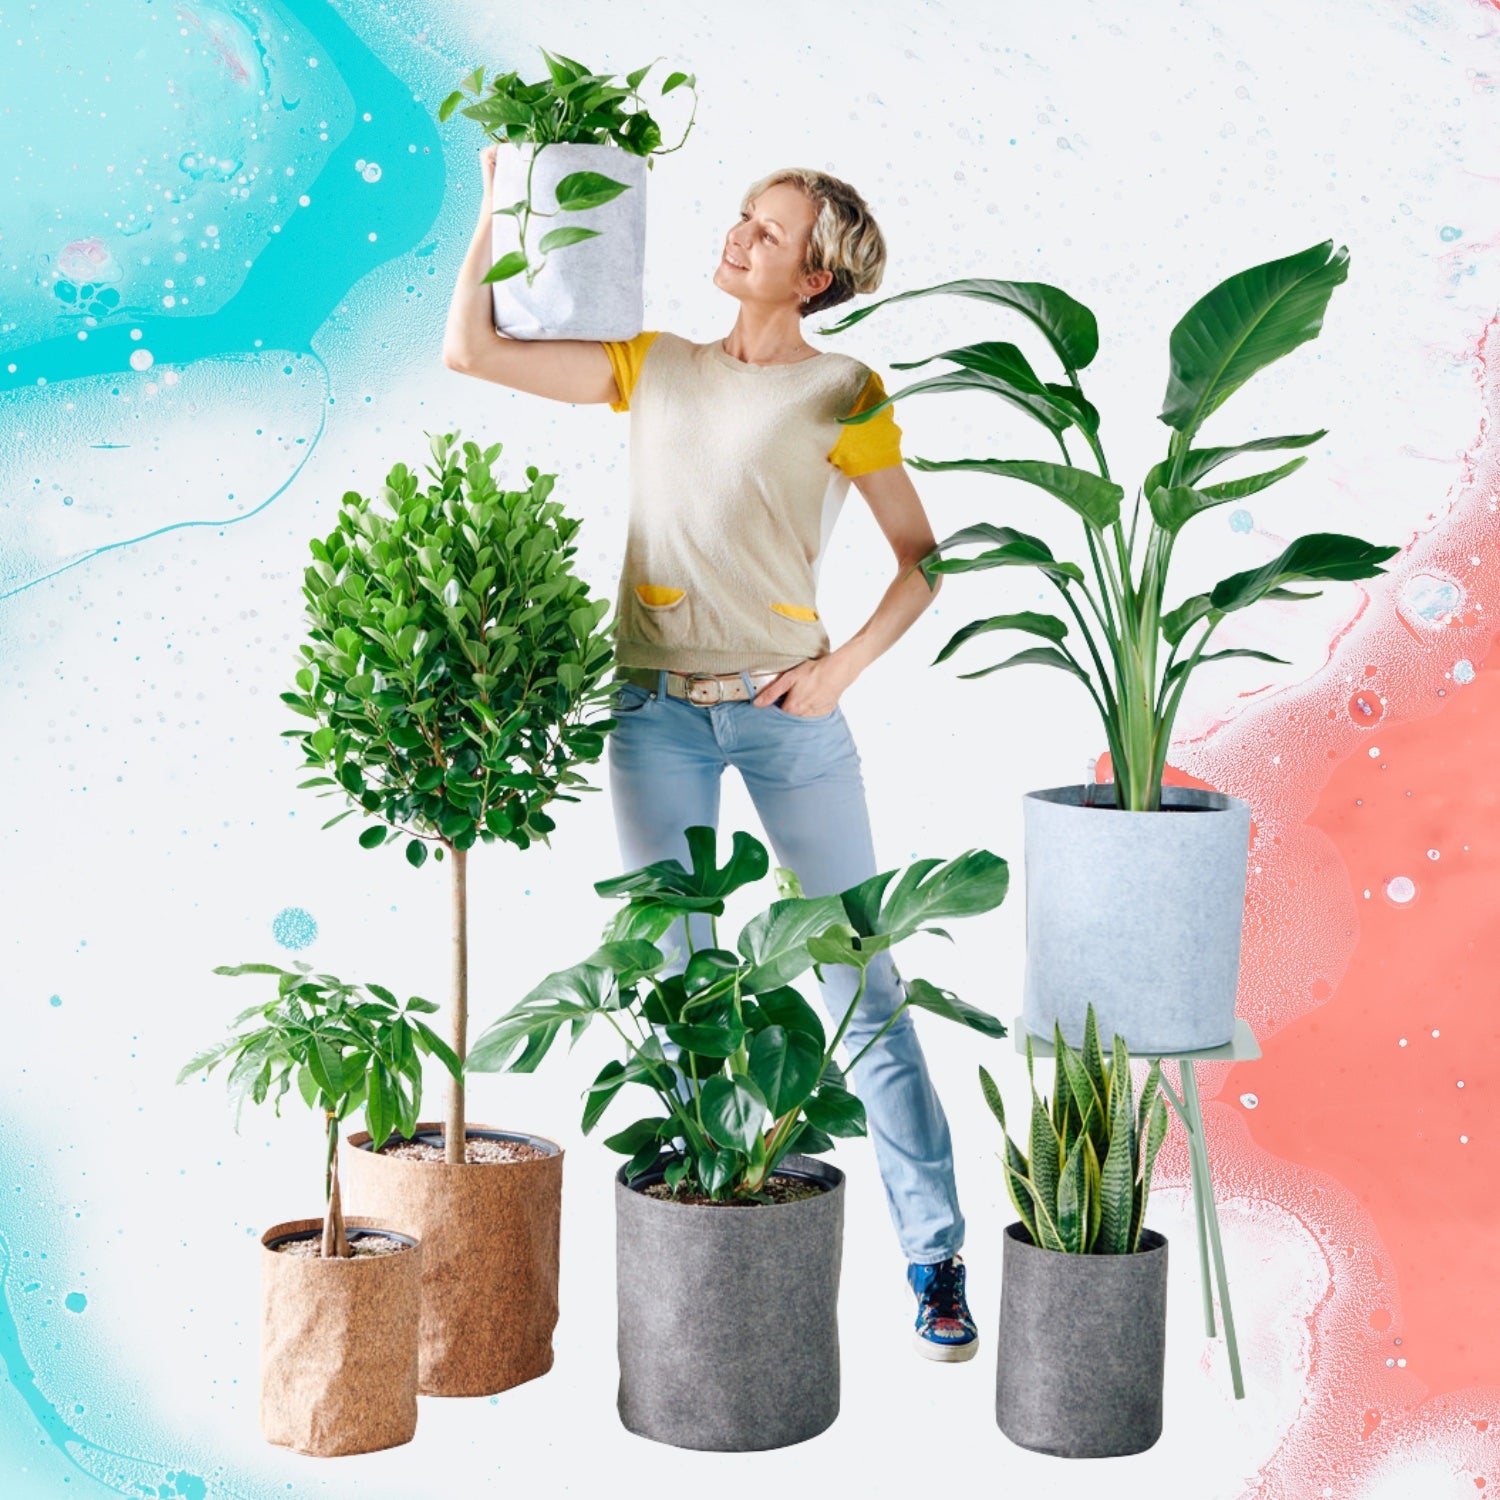 Office plant services - office plant delivery & office plant maintenance services - New York